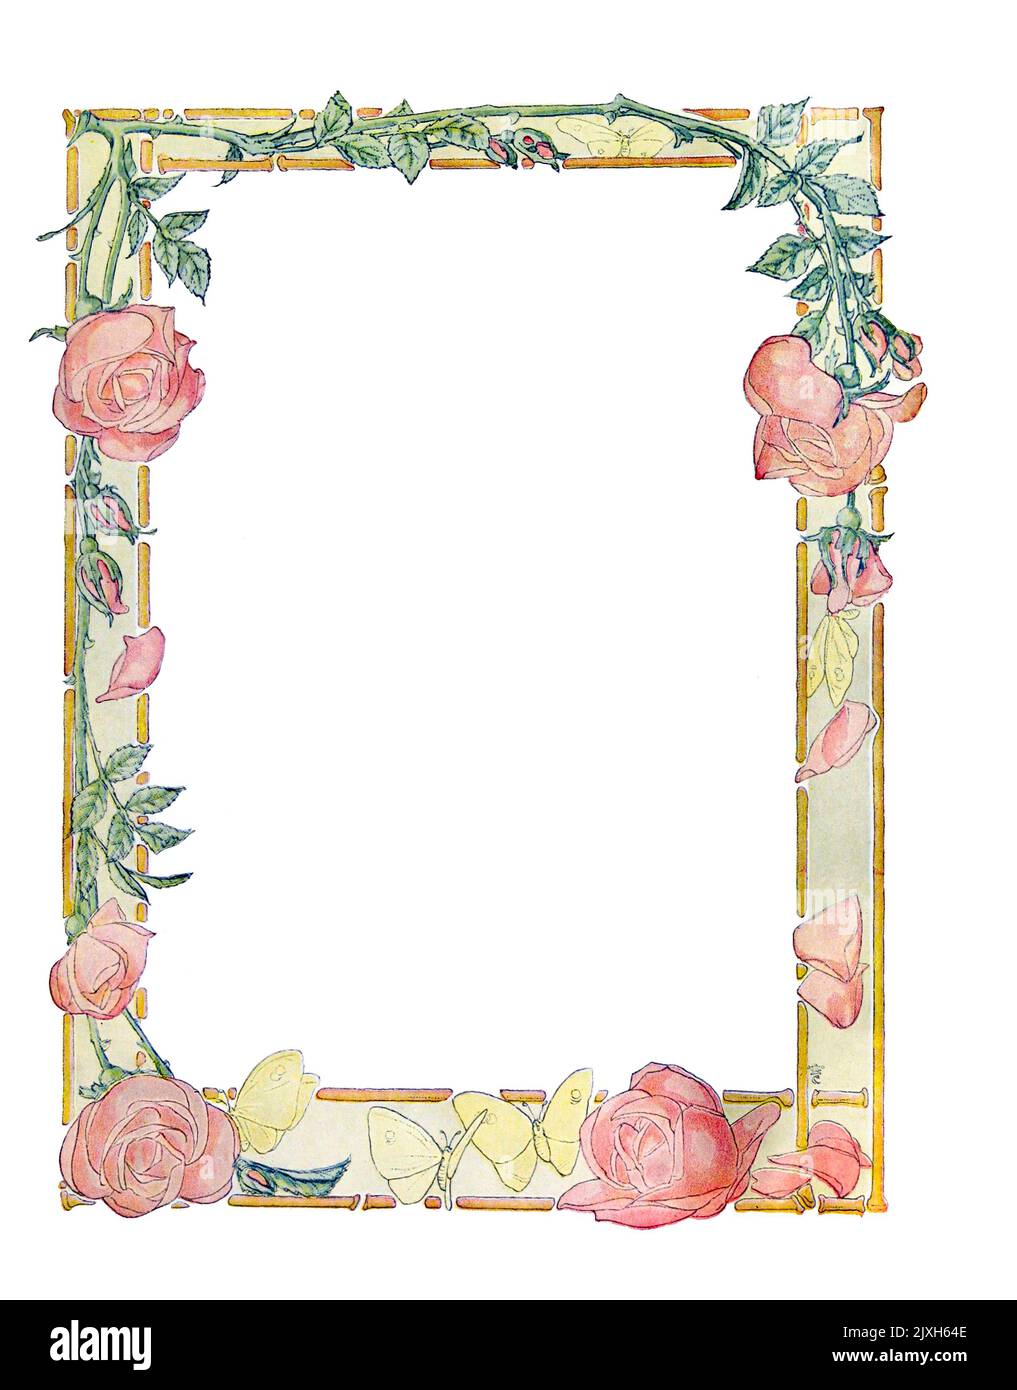 floral frame decorations on white background by Earl Stetson Crawford published 1909 Stock Photo